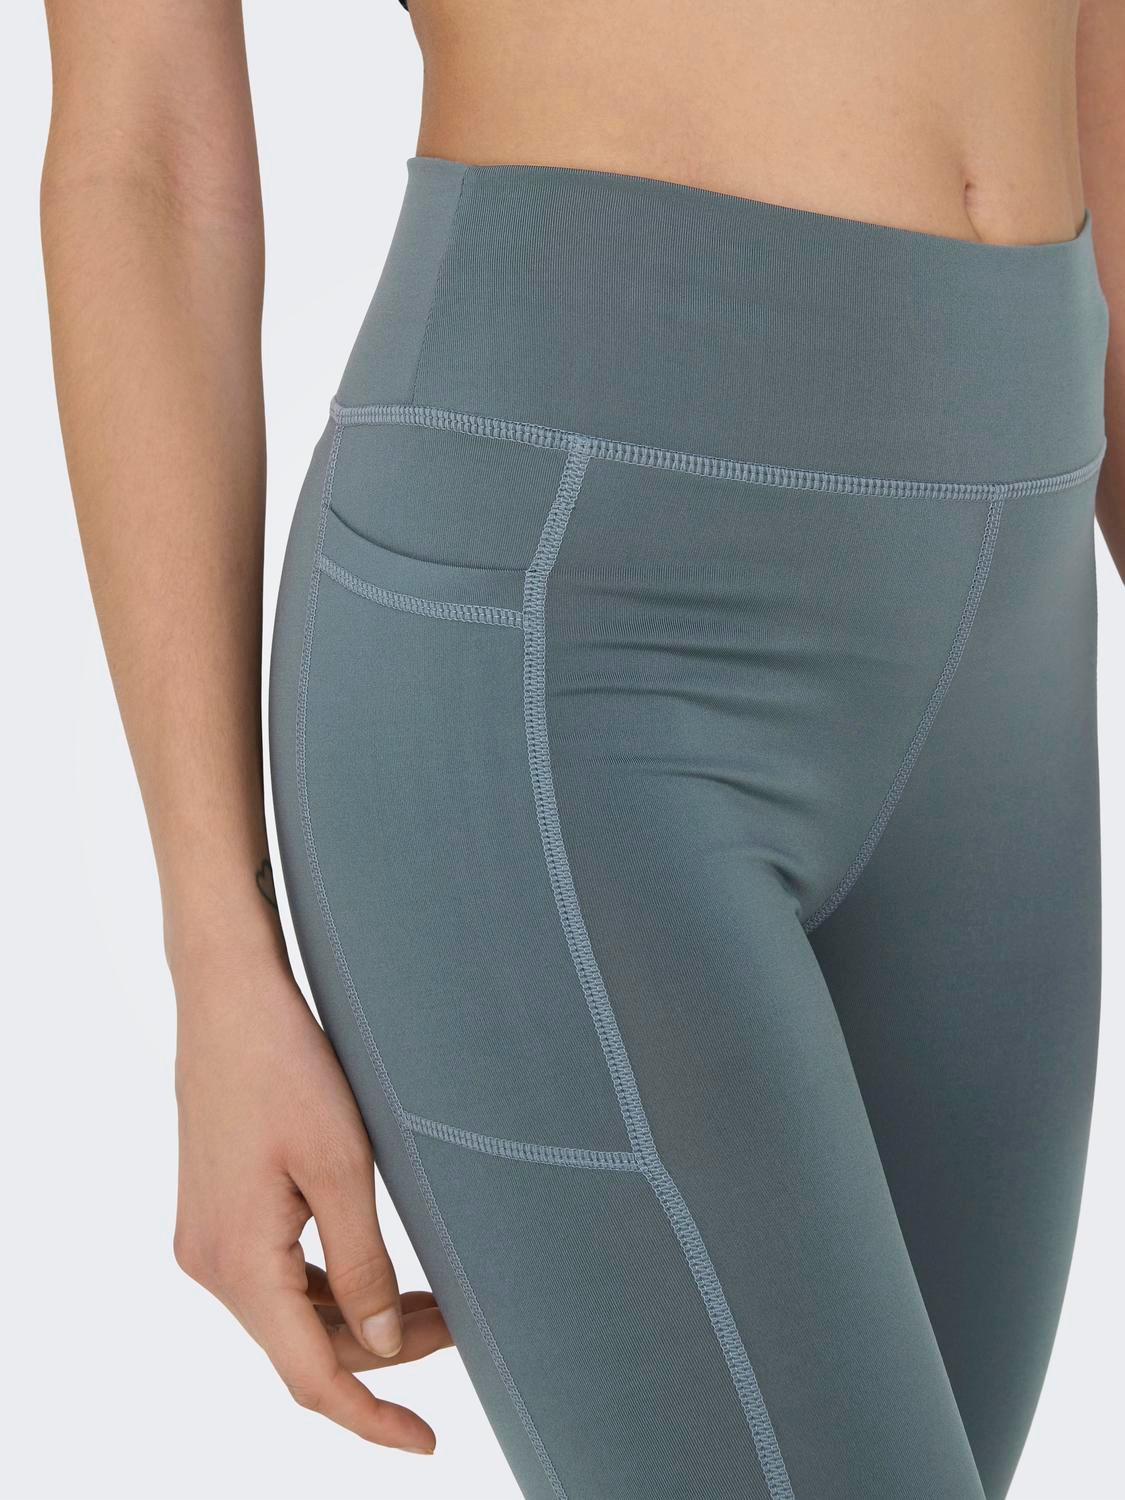 ONLY Tight Fit High waist Leggings -Stormy Weather - 15295214